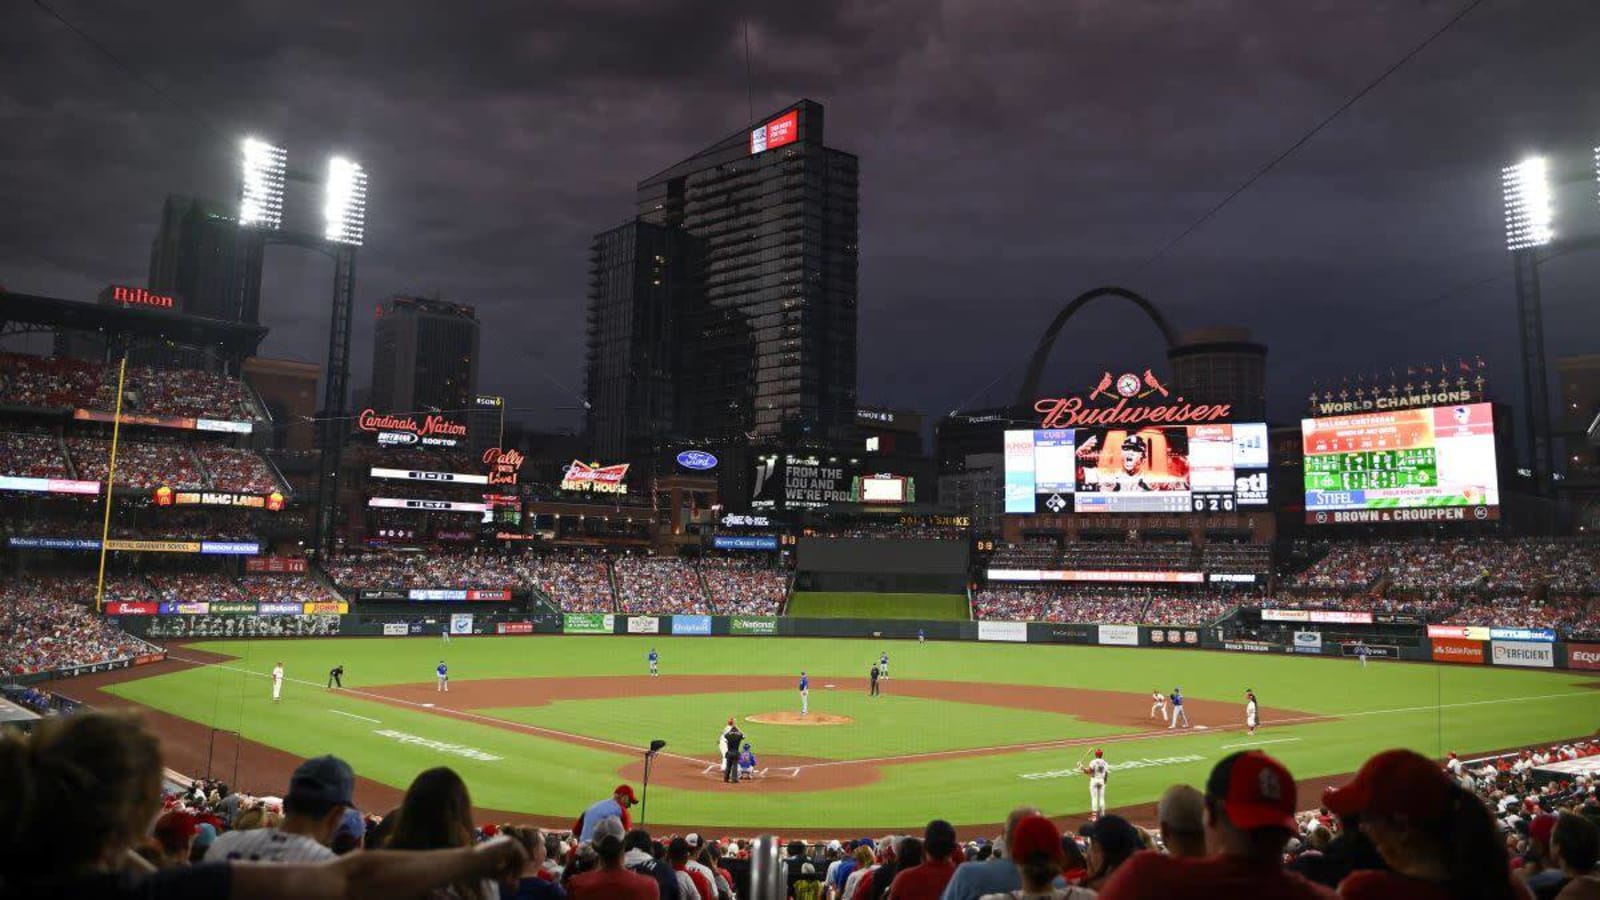 Cardinals Free Agent Signs Lucrative Deal With NL Foe, Ending Reunion Hopes